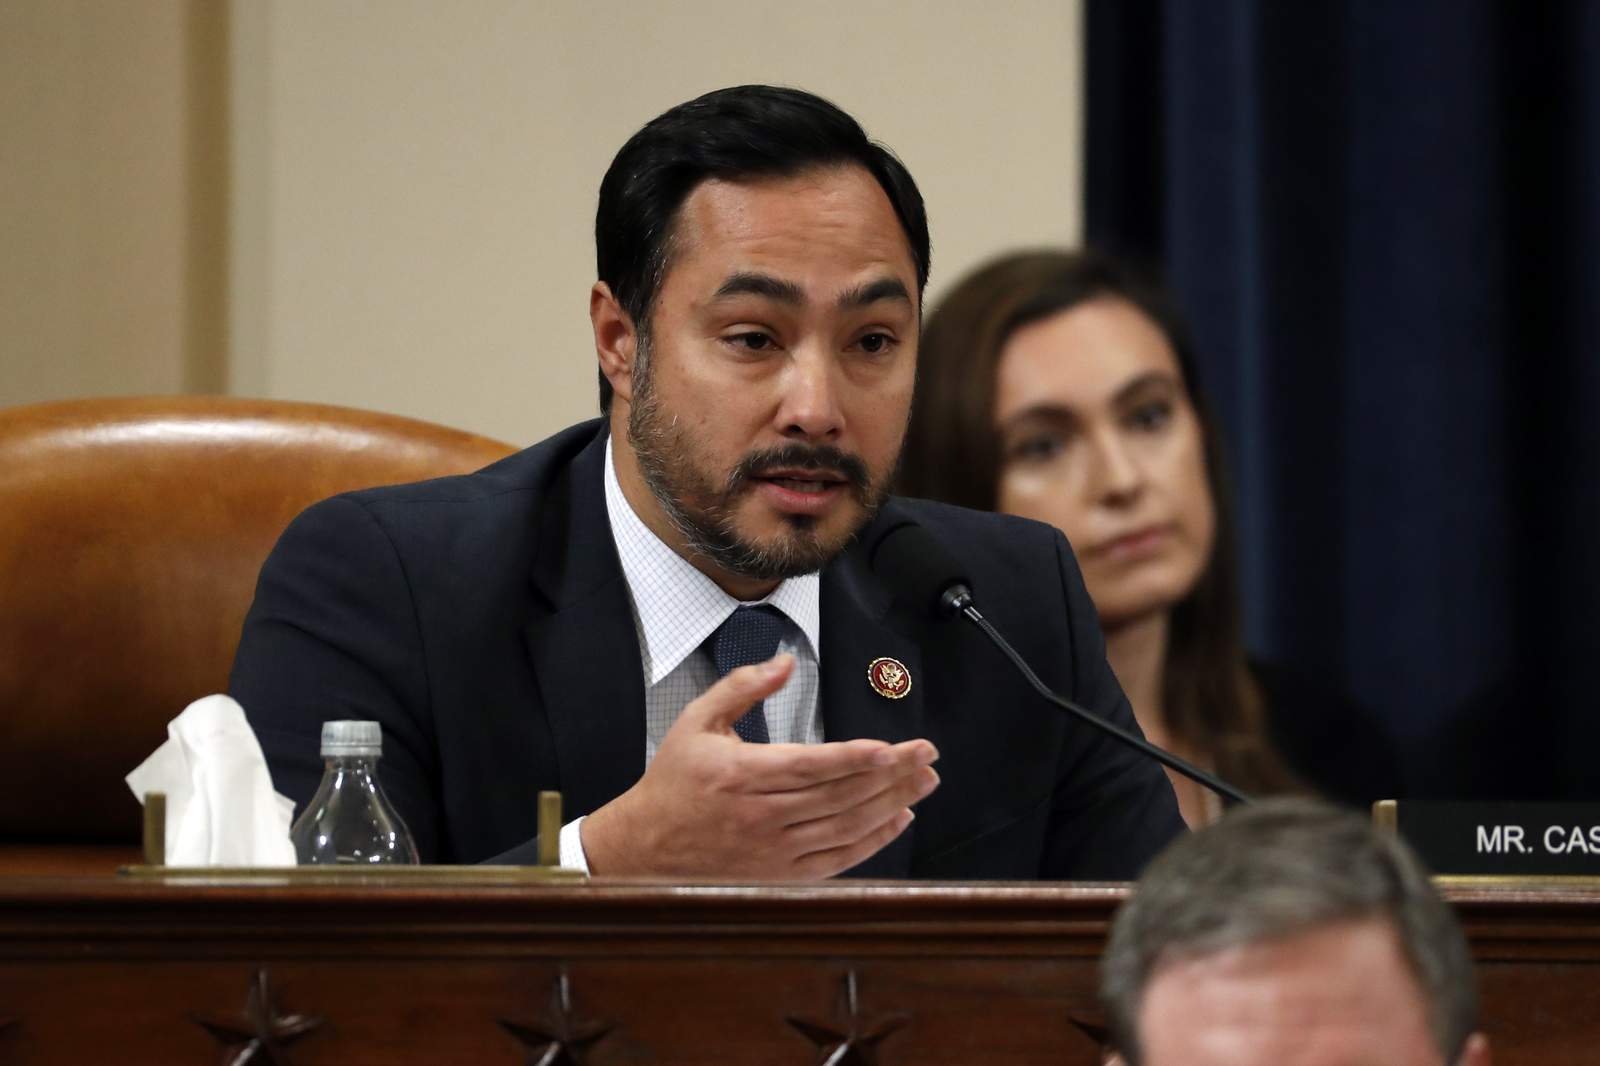 Rep. Castro launches investigation into Pompeo RNC speech, says it may be illegal'